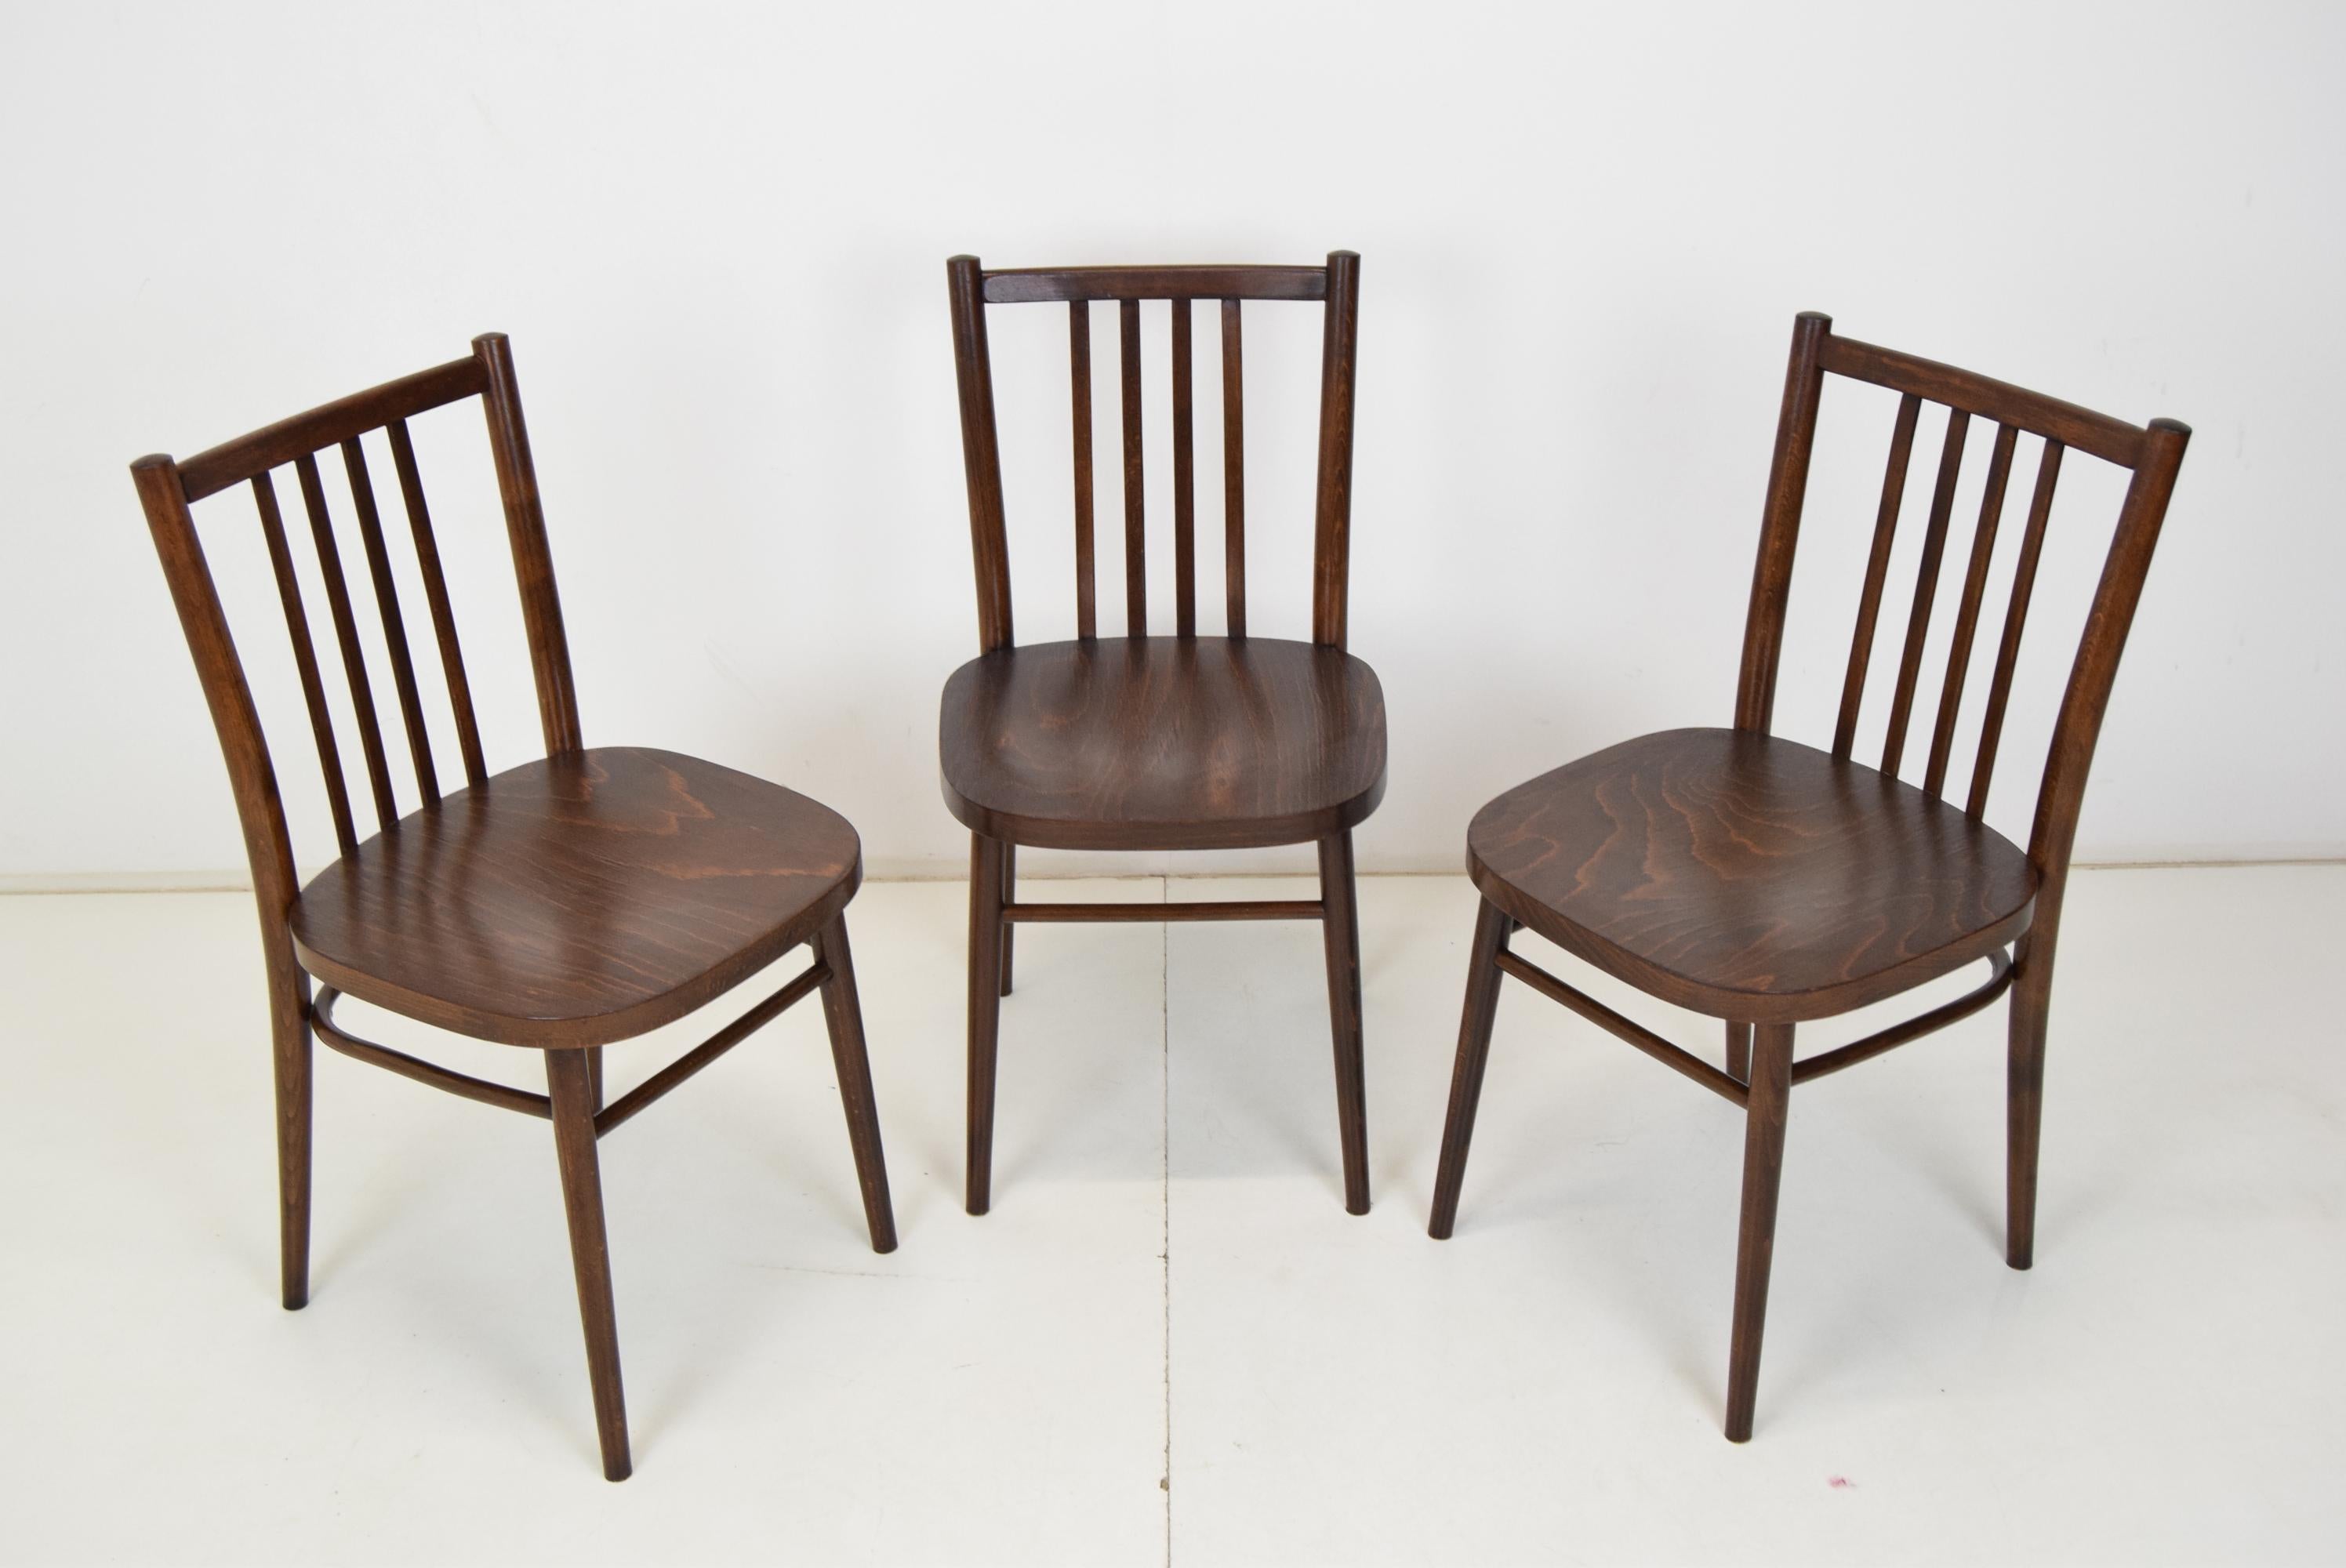 Mid-century set of Three Chairs,TON,1960's.
Made in Czechoslovakia
Made of Wood
Possibility to sell in pieces
Original condition.